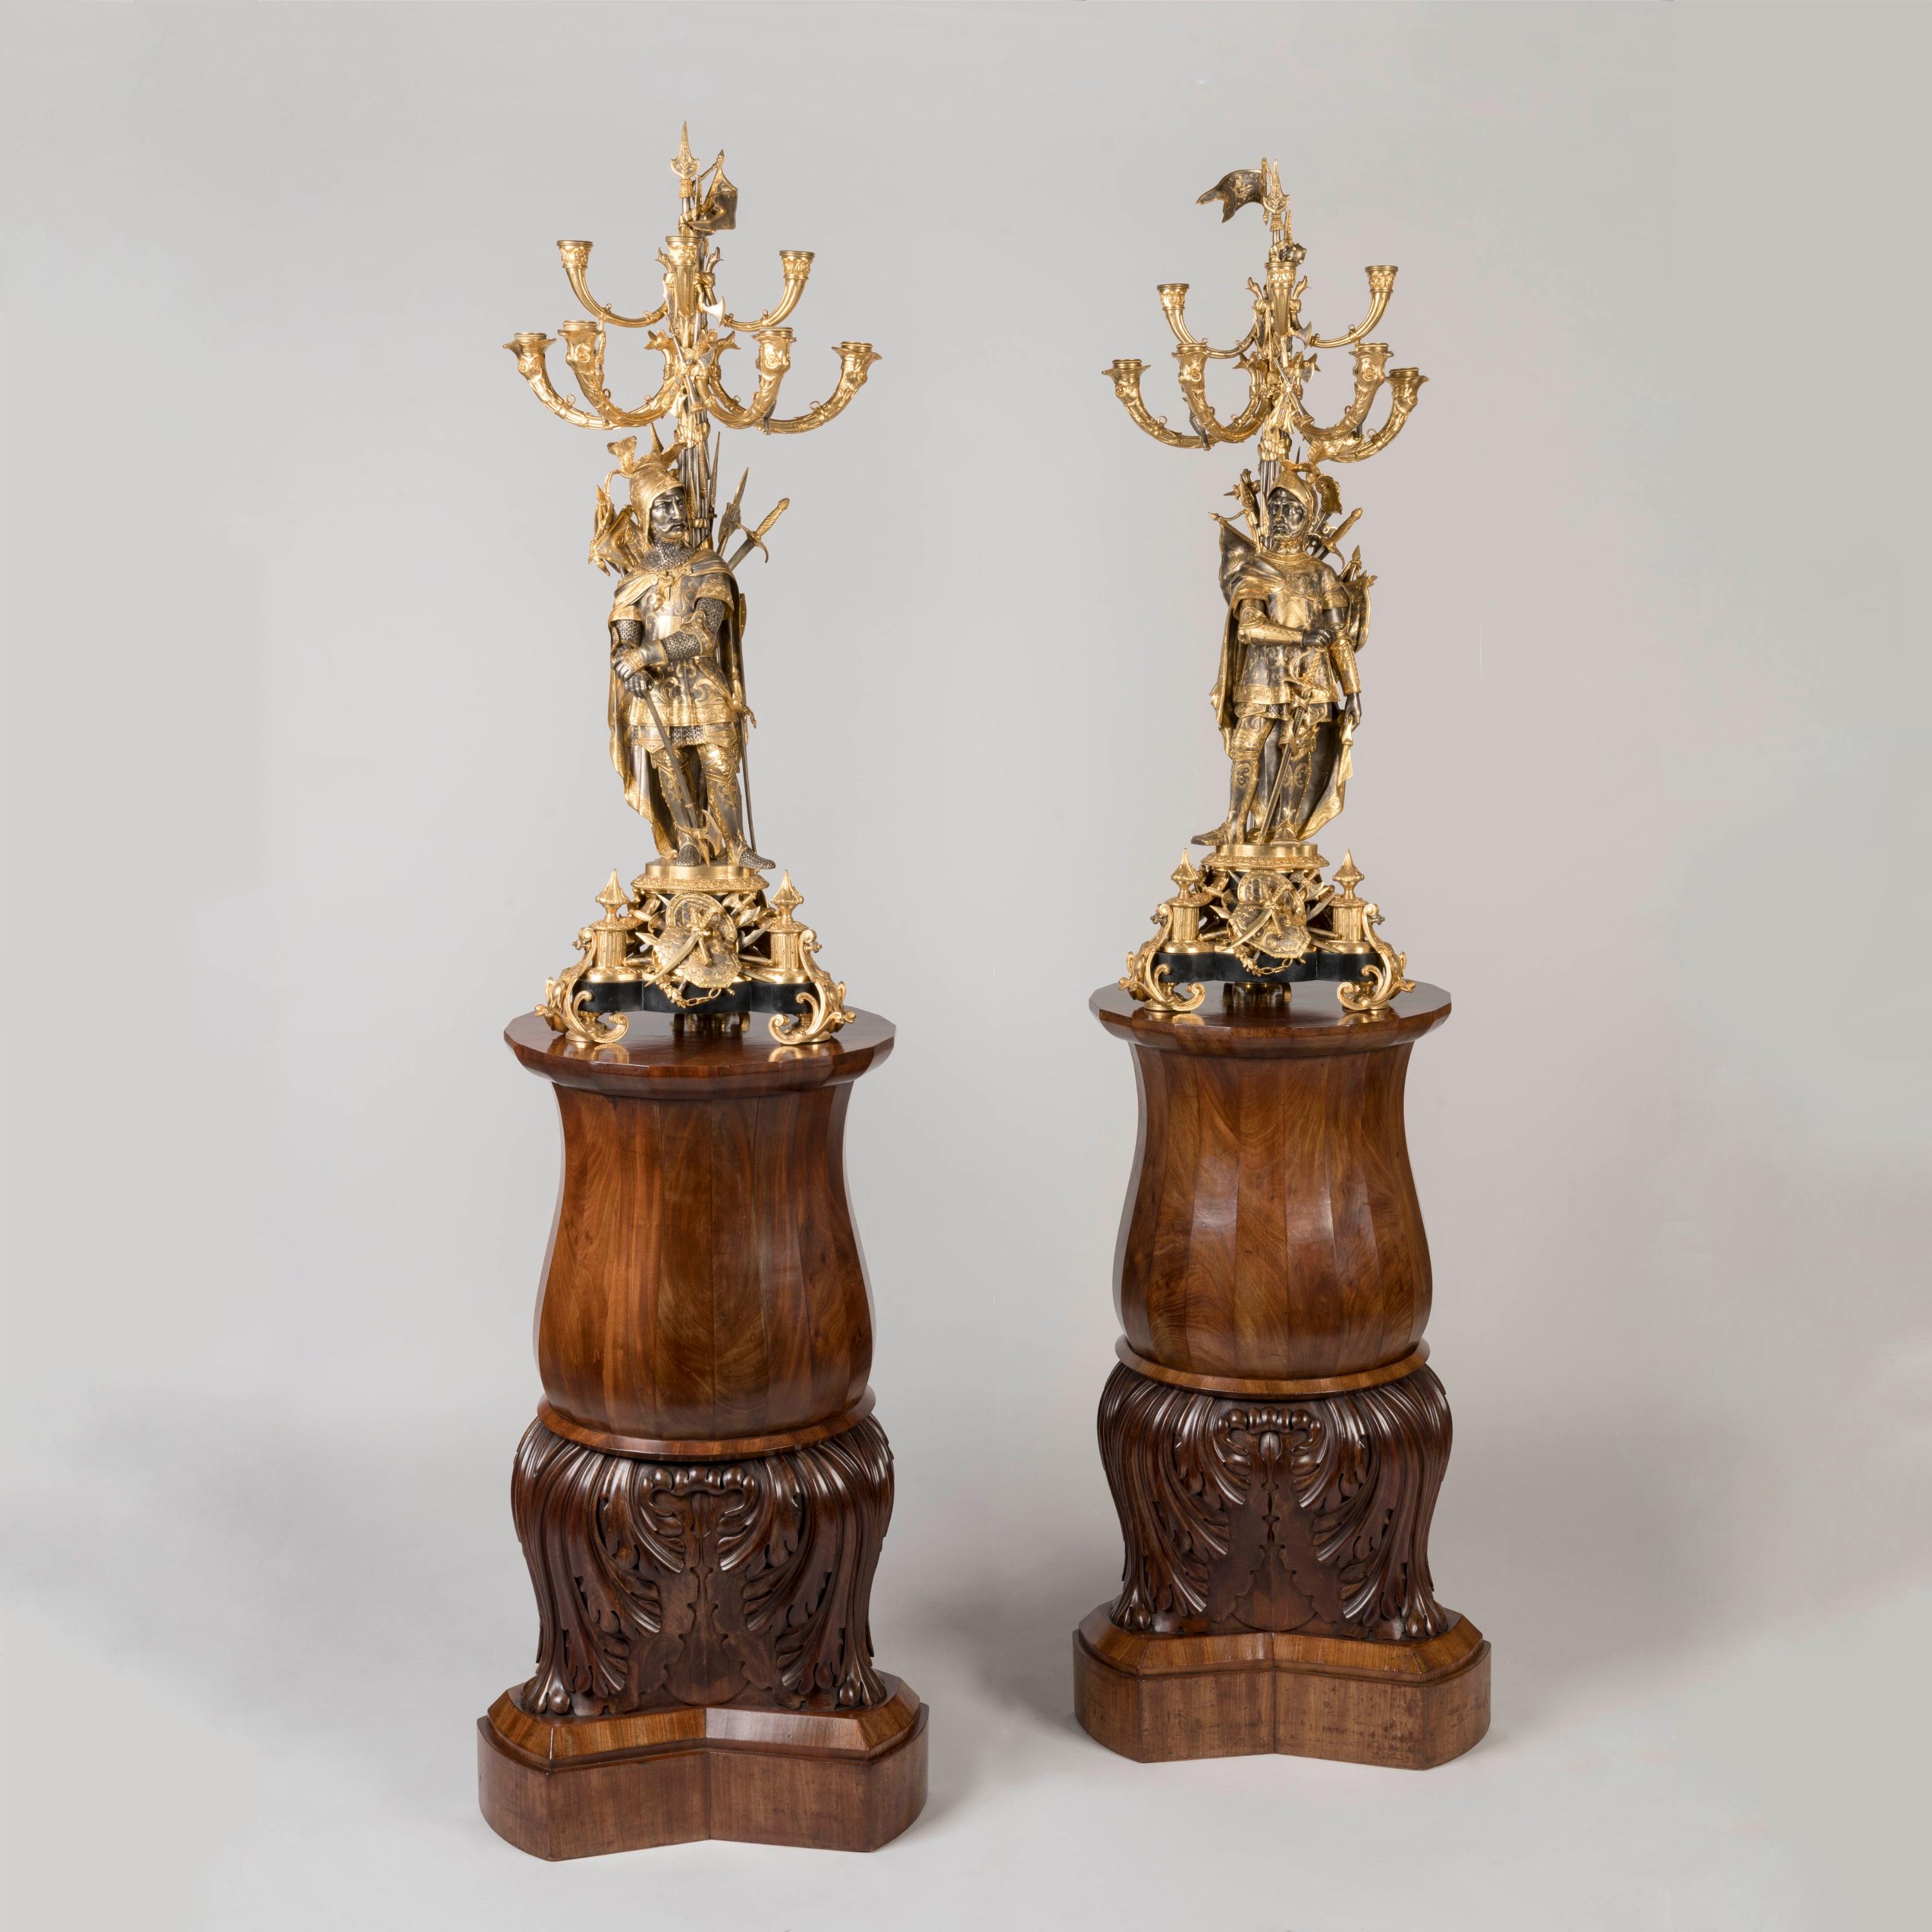 A Pair of Mid-19th Century Carved Baluster Pedestals

Carved from mahogany, each bulbous baluster pedestal rising from a stepped plinth  supporting the oversized acanthus base beneath the waisted multi-faceted mahogany body.
Circa 1845

Great as